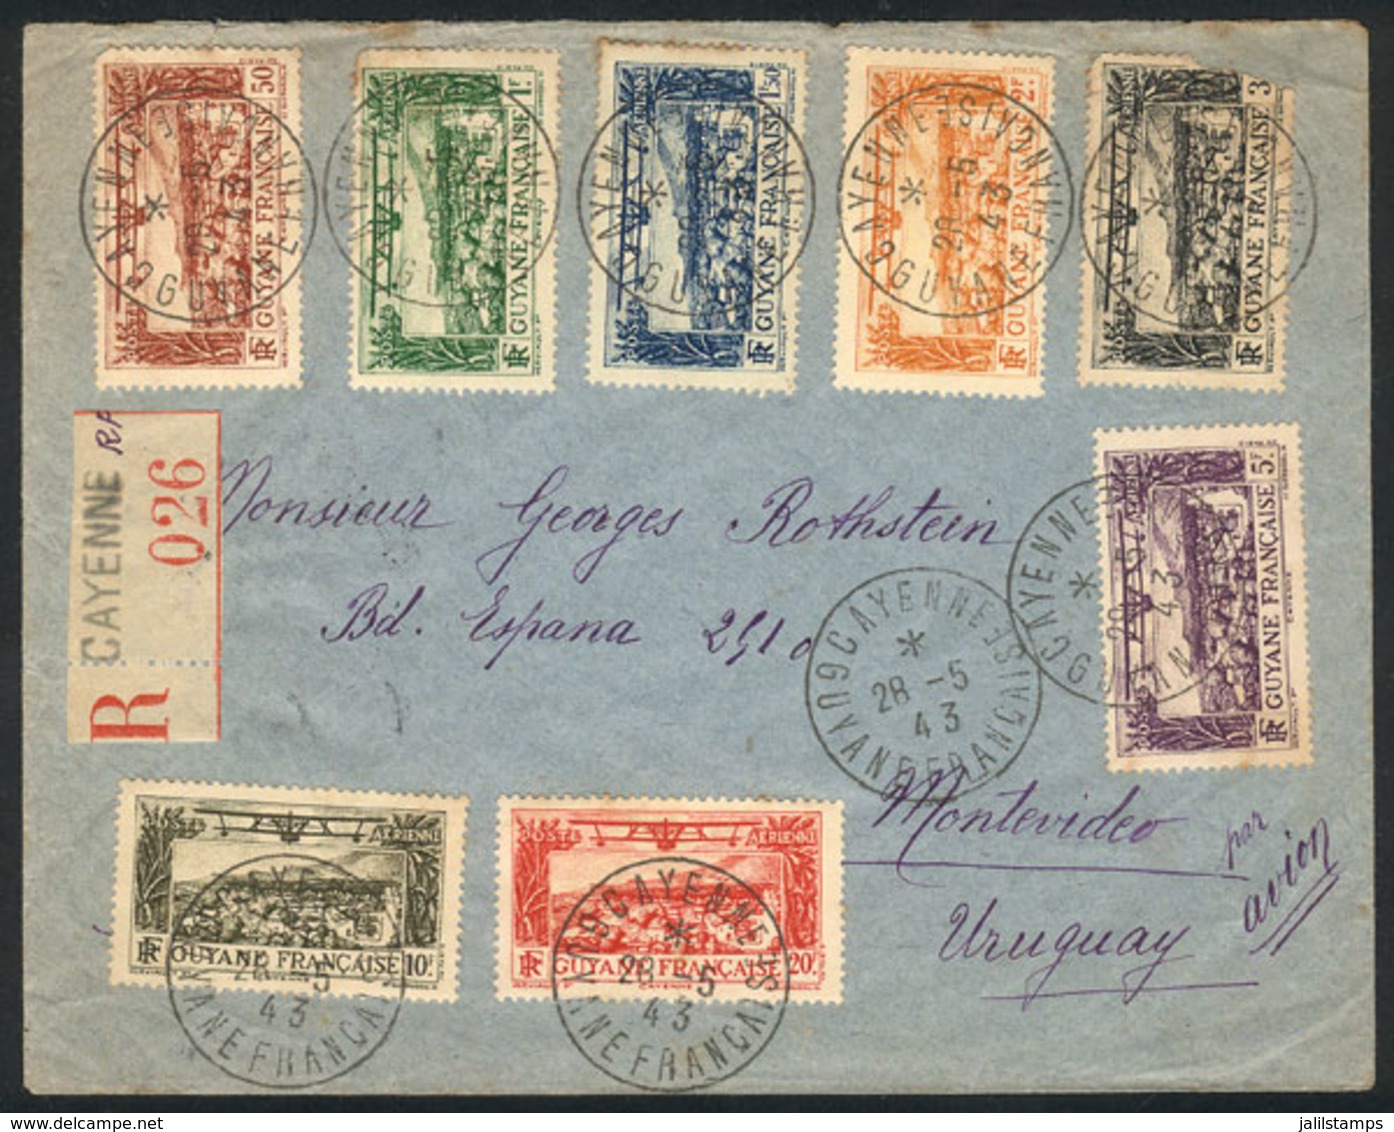 FRENCH GUIANA: 28/MAY/1943 Cayenne - Uruguay, Registered Airmail Cover Franked With Complete Set Sc.C1/C8 (the 3Fr. Valu - Covers & Documents